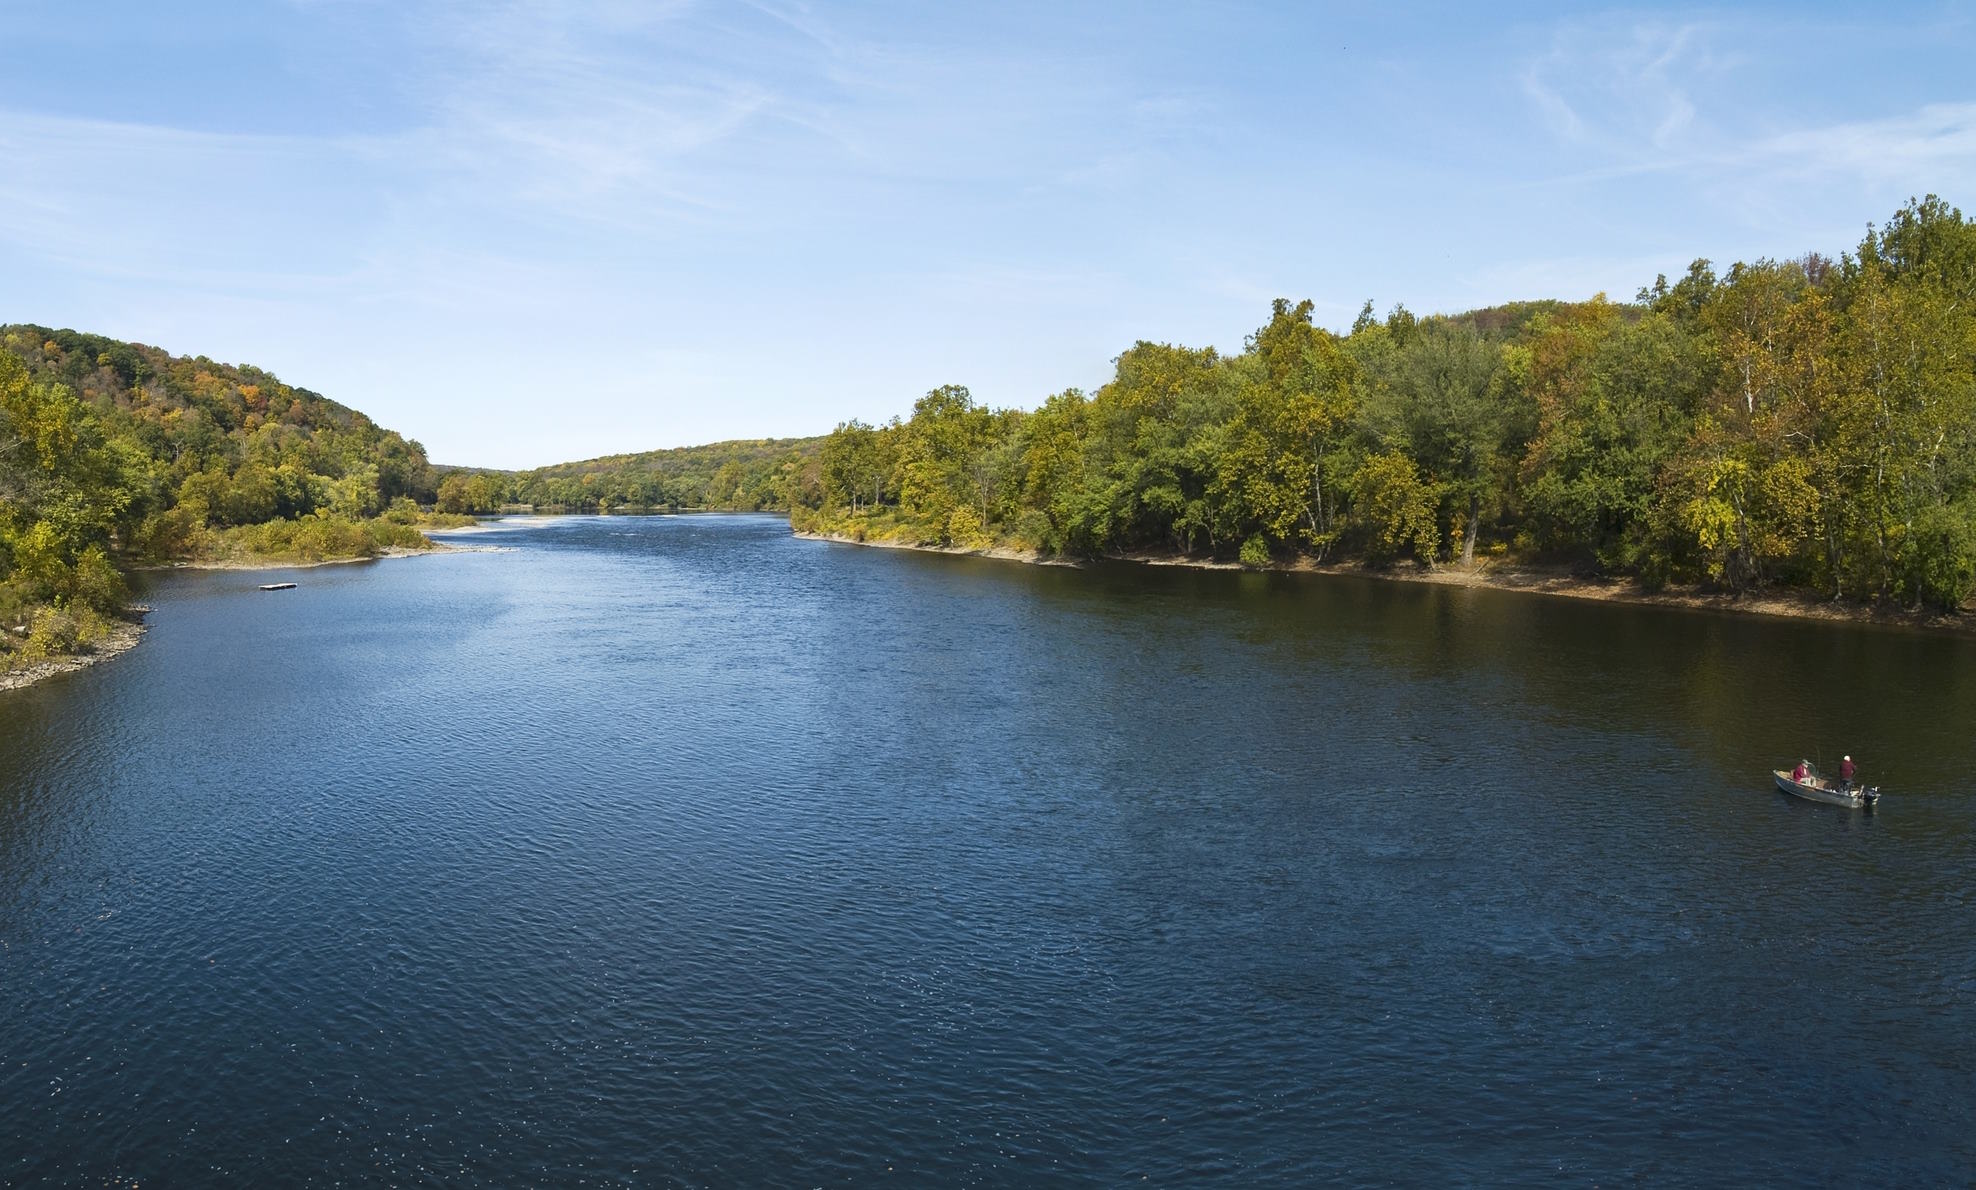 Image of the gorgeous Delaware River which separates Frenchtown New Jersey from Pennsylvania